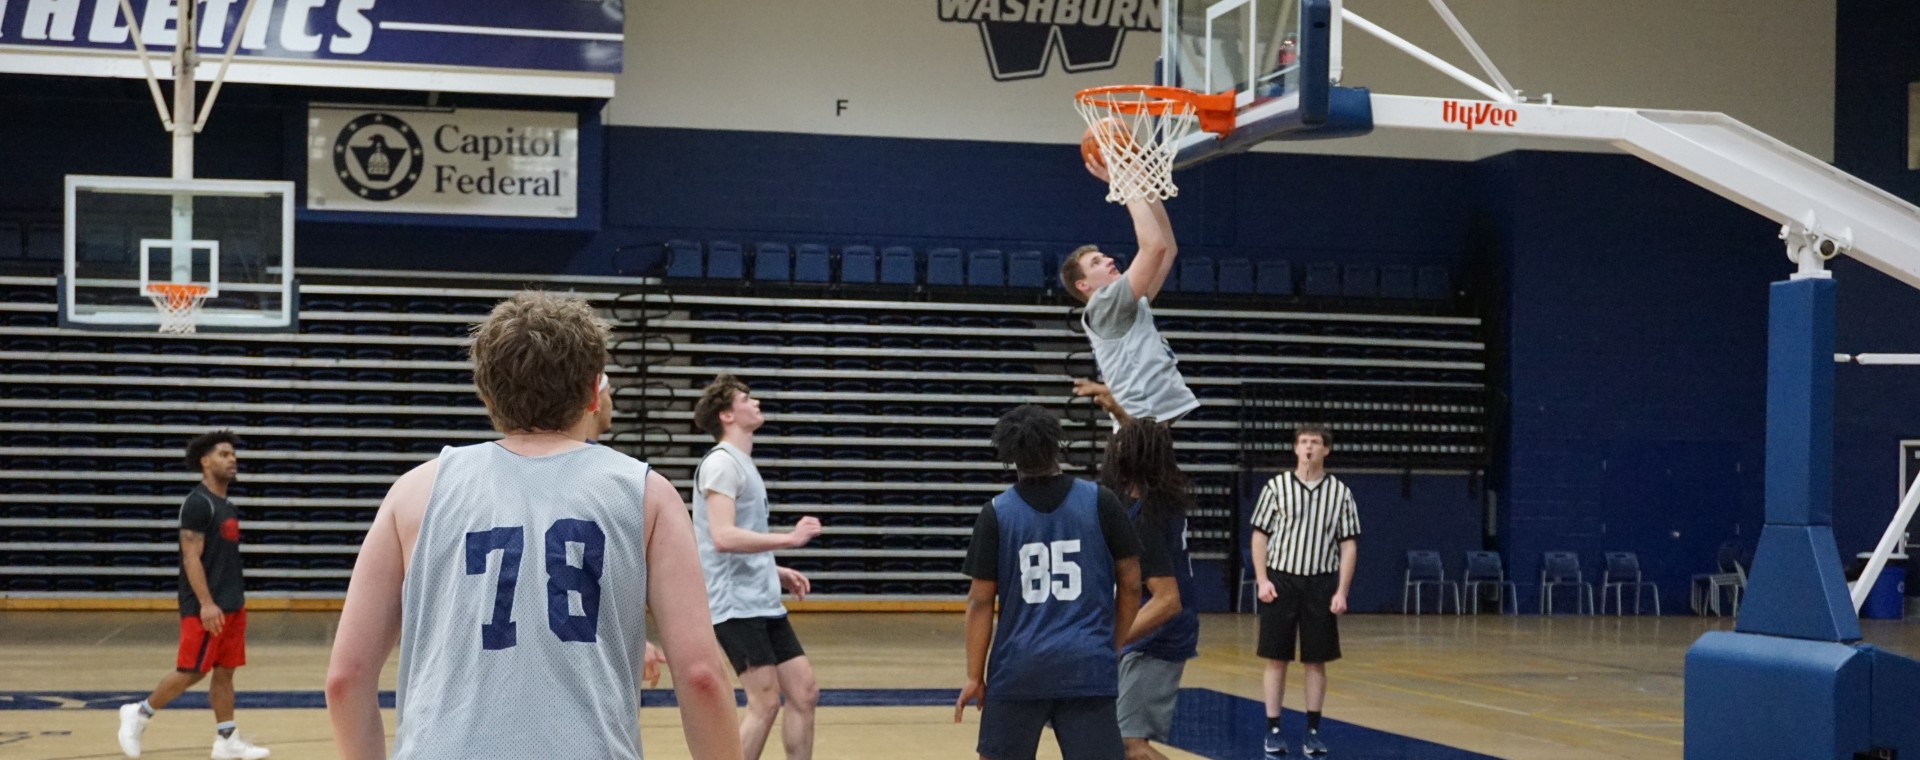 intramural sports playing basketball